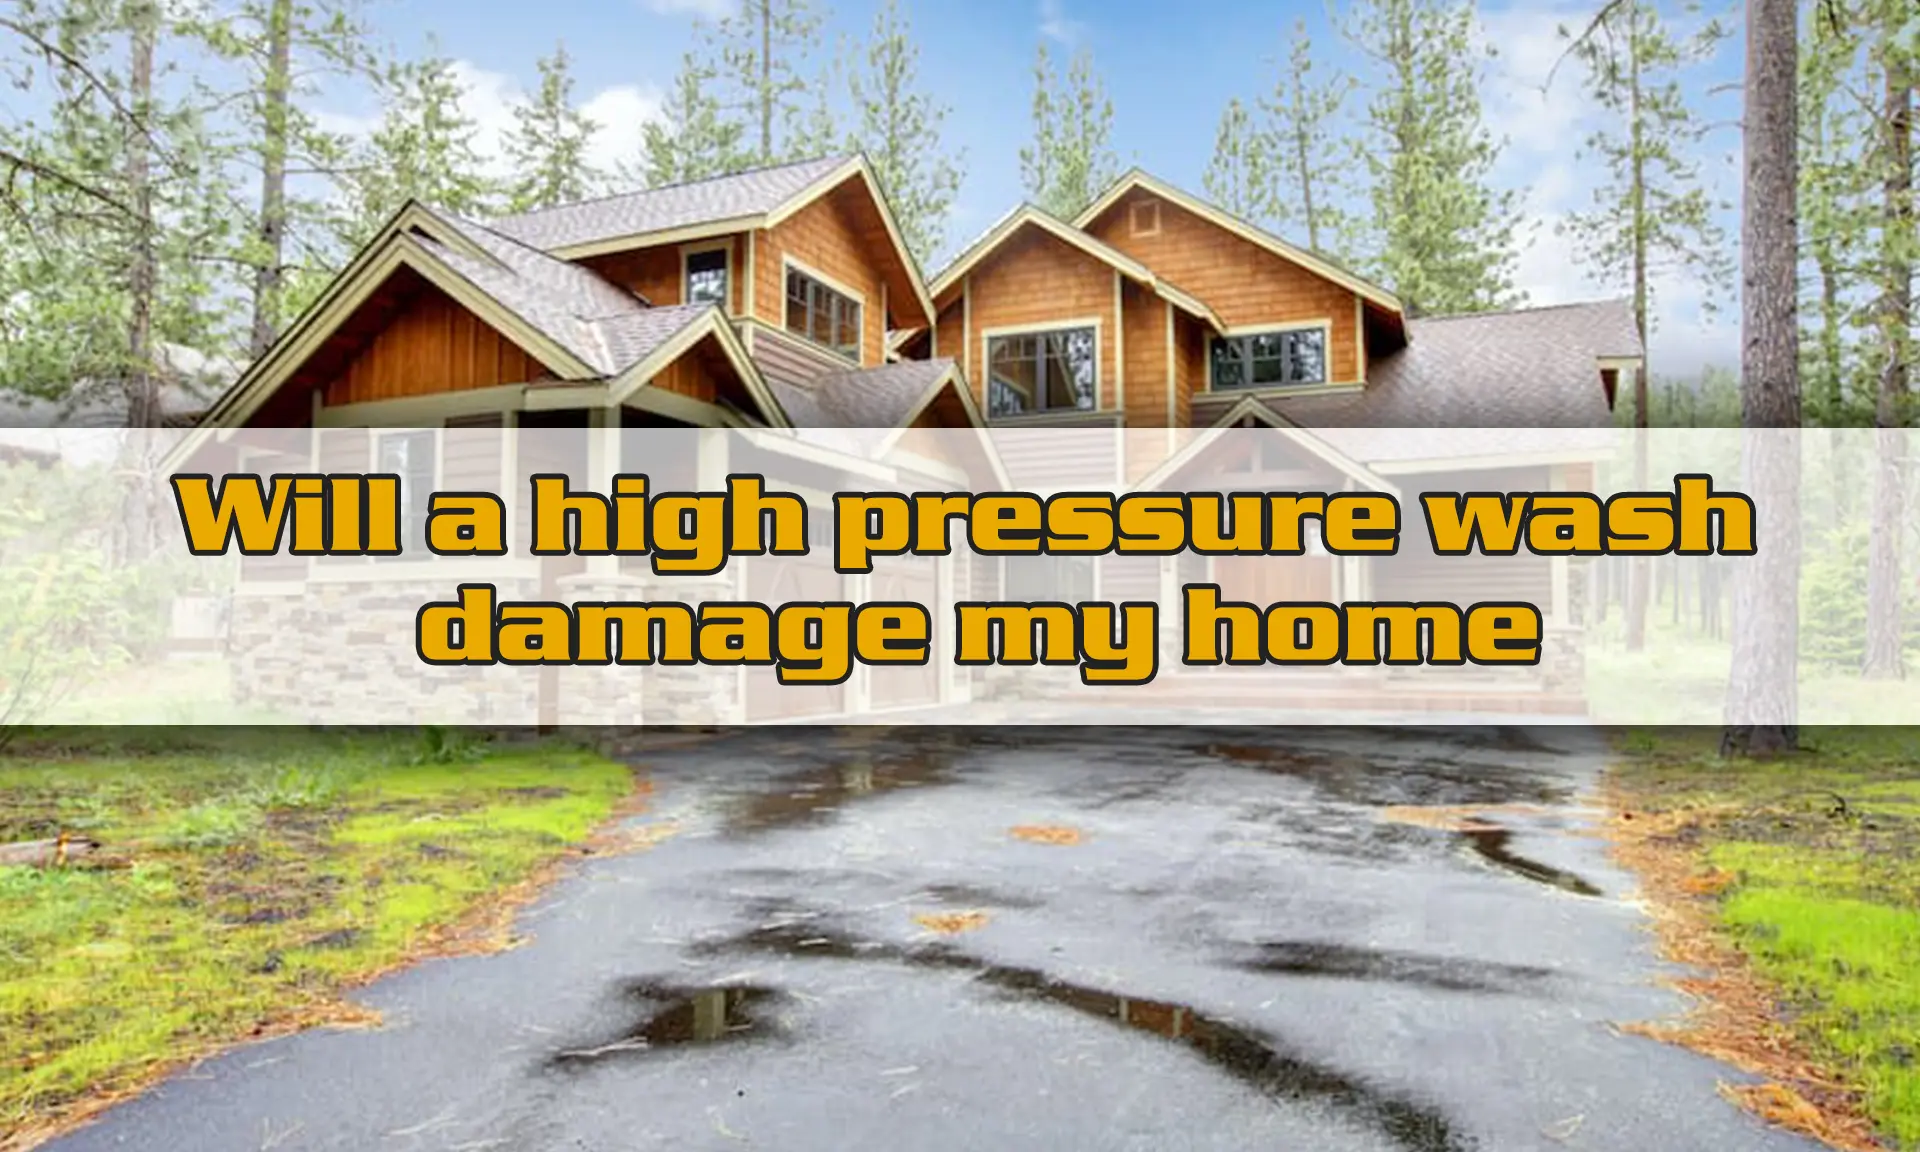 Will a high pressure wash damage my home